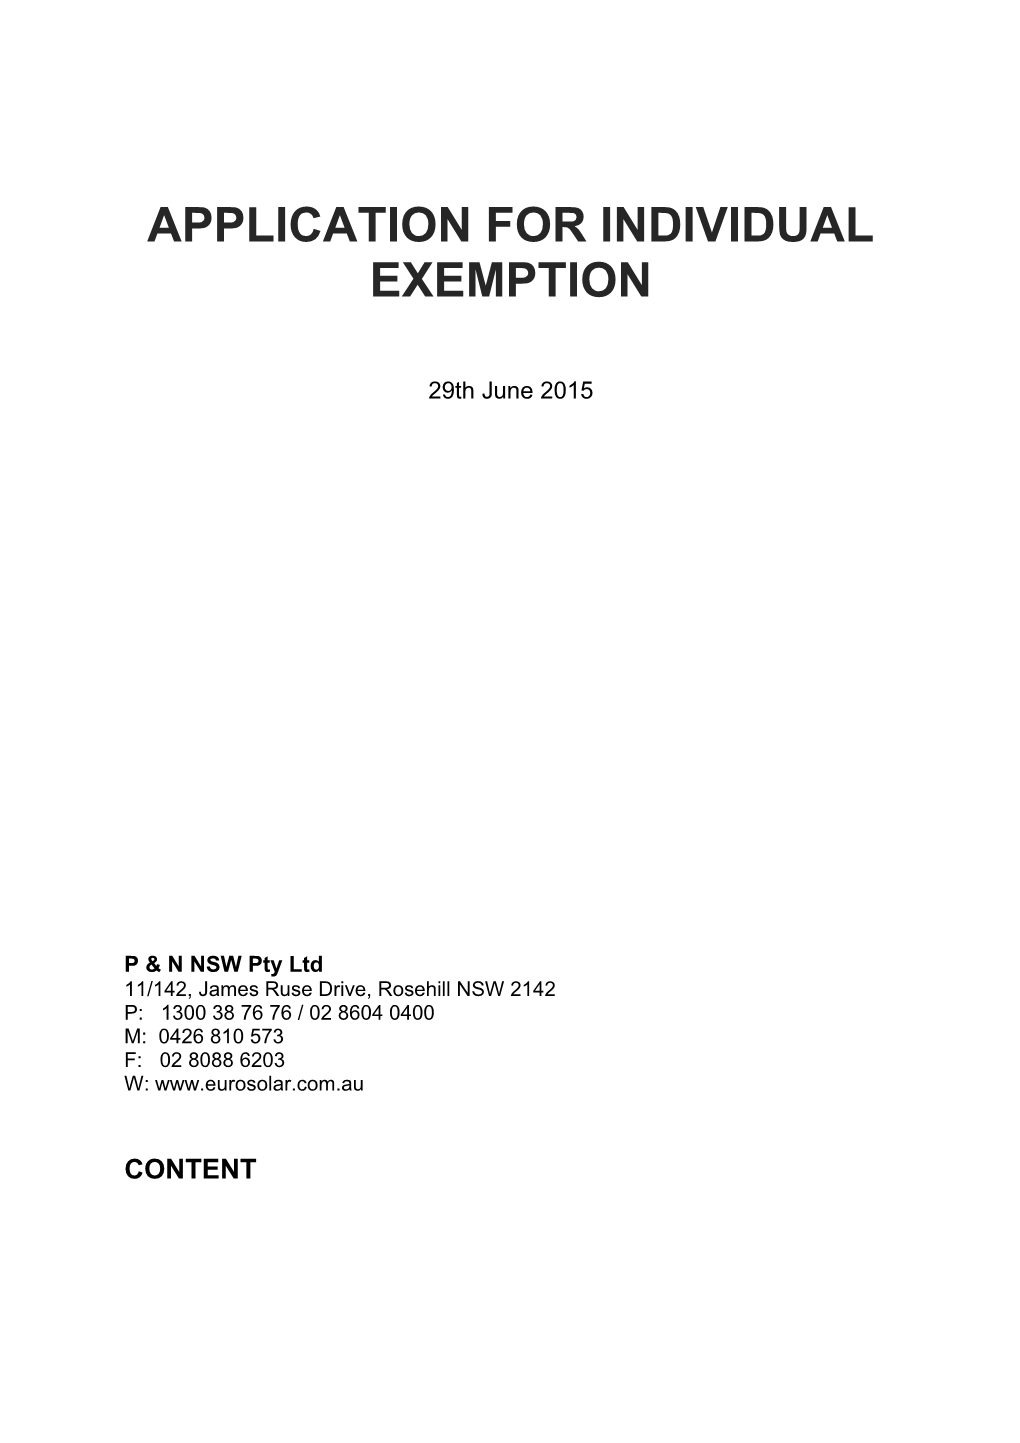 Application for Individual Exemption